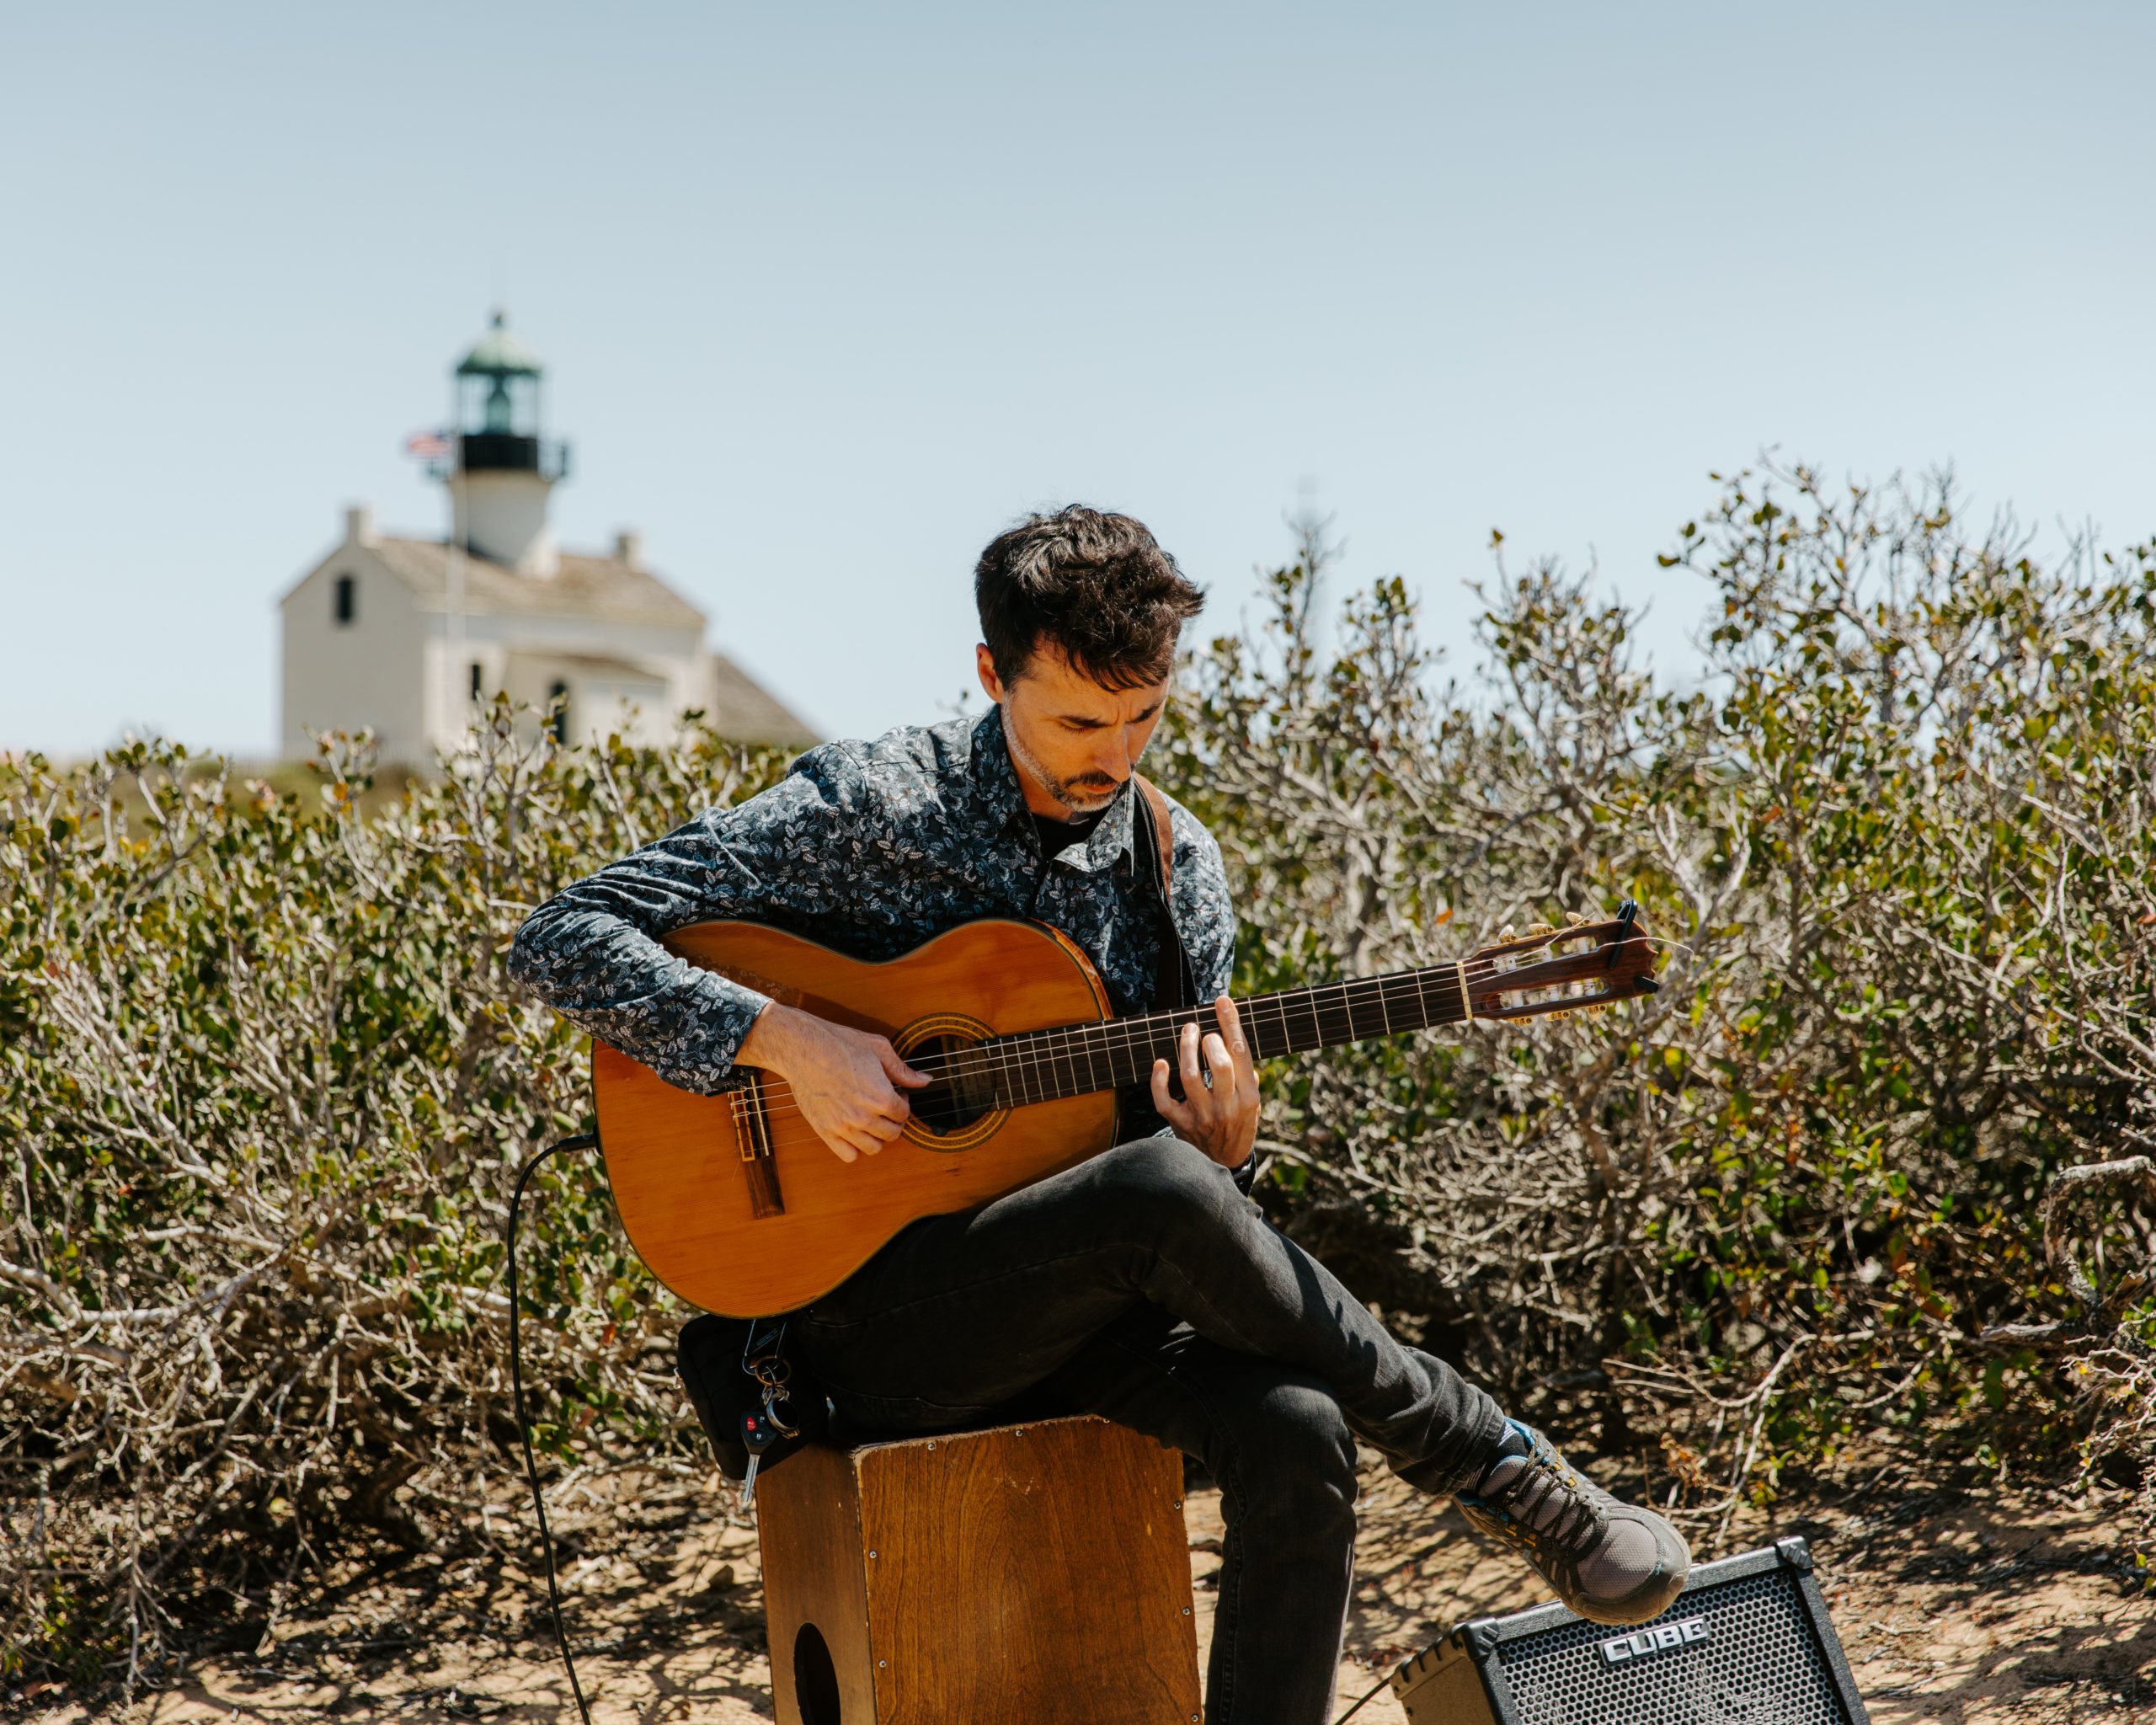 Guitarist playing music live at Cabrillo Monument Wedding Ceremony by the cliffside